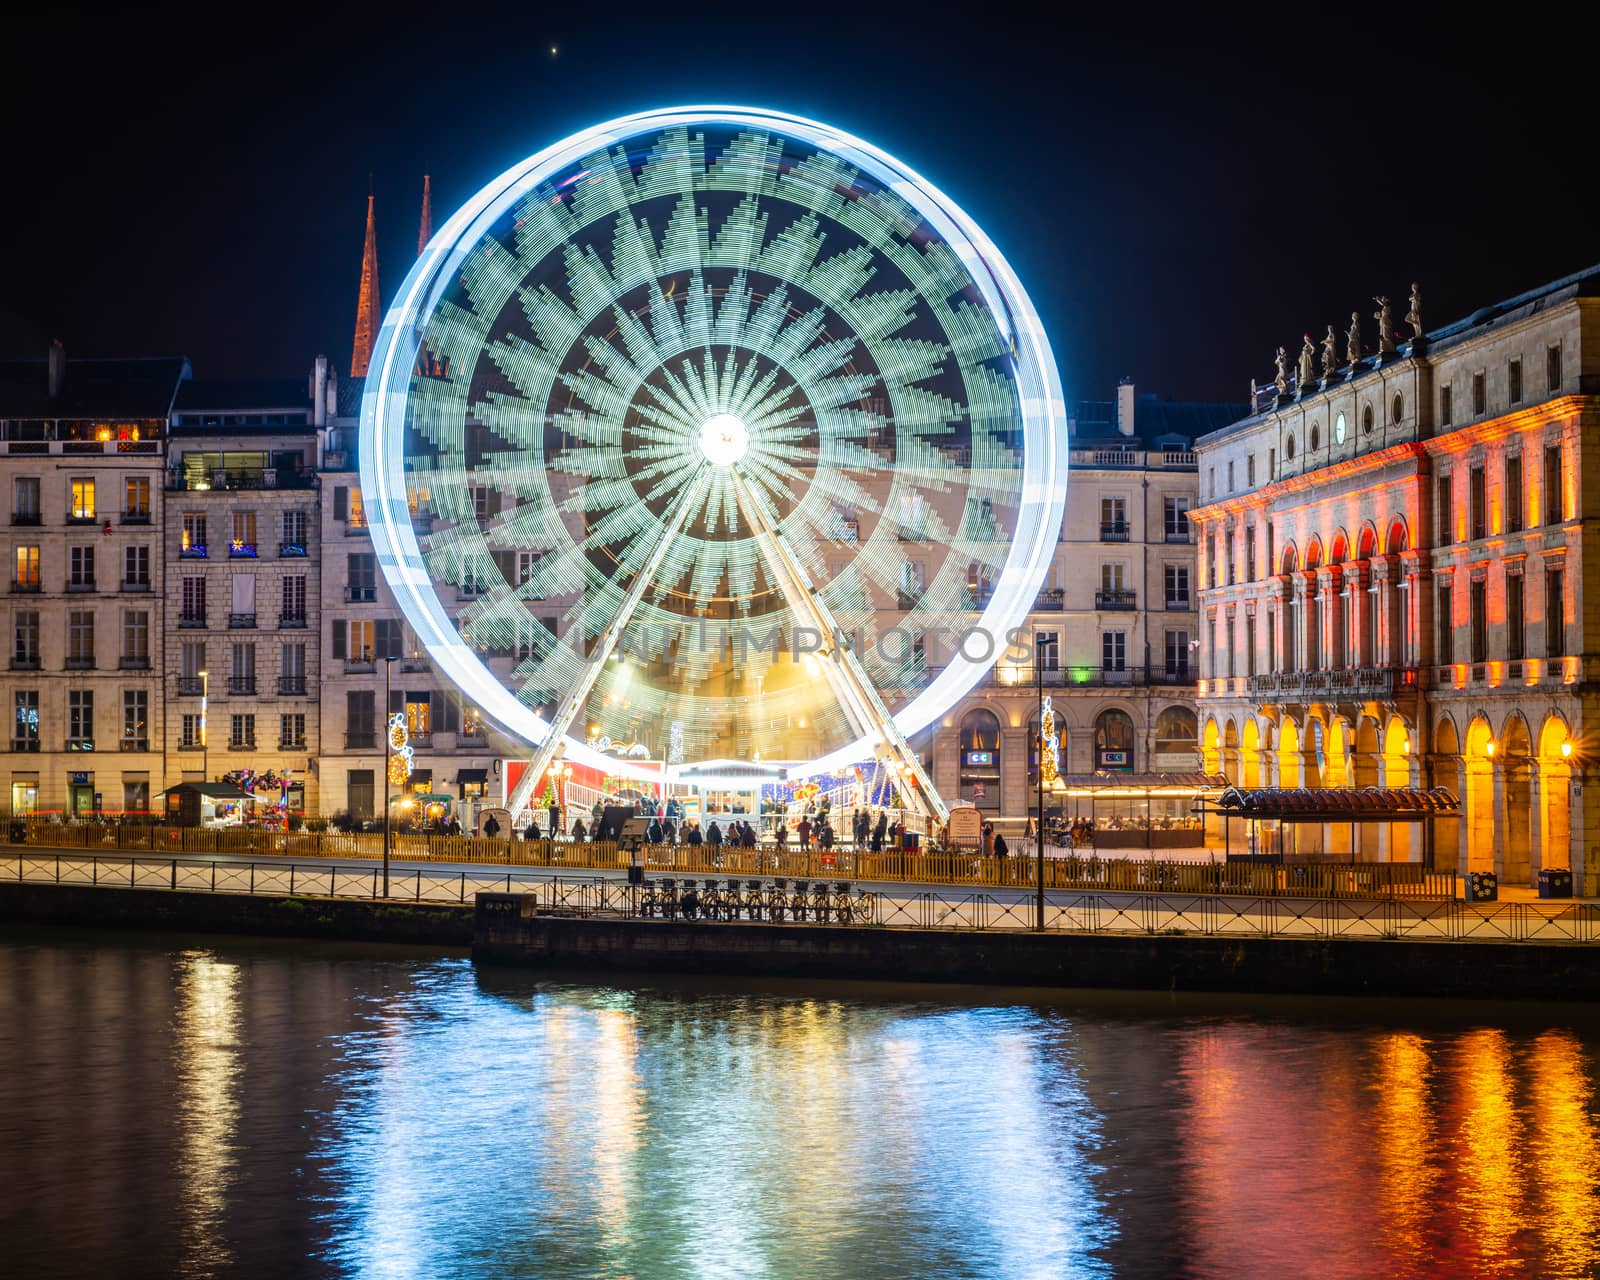 BAYONNE, FRANCE - DECEMBER 28, 2019: The ferris wheel at night. Bayonne city hall illuminated on the right hand side.